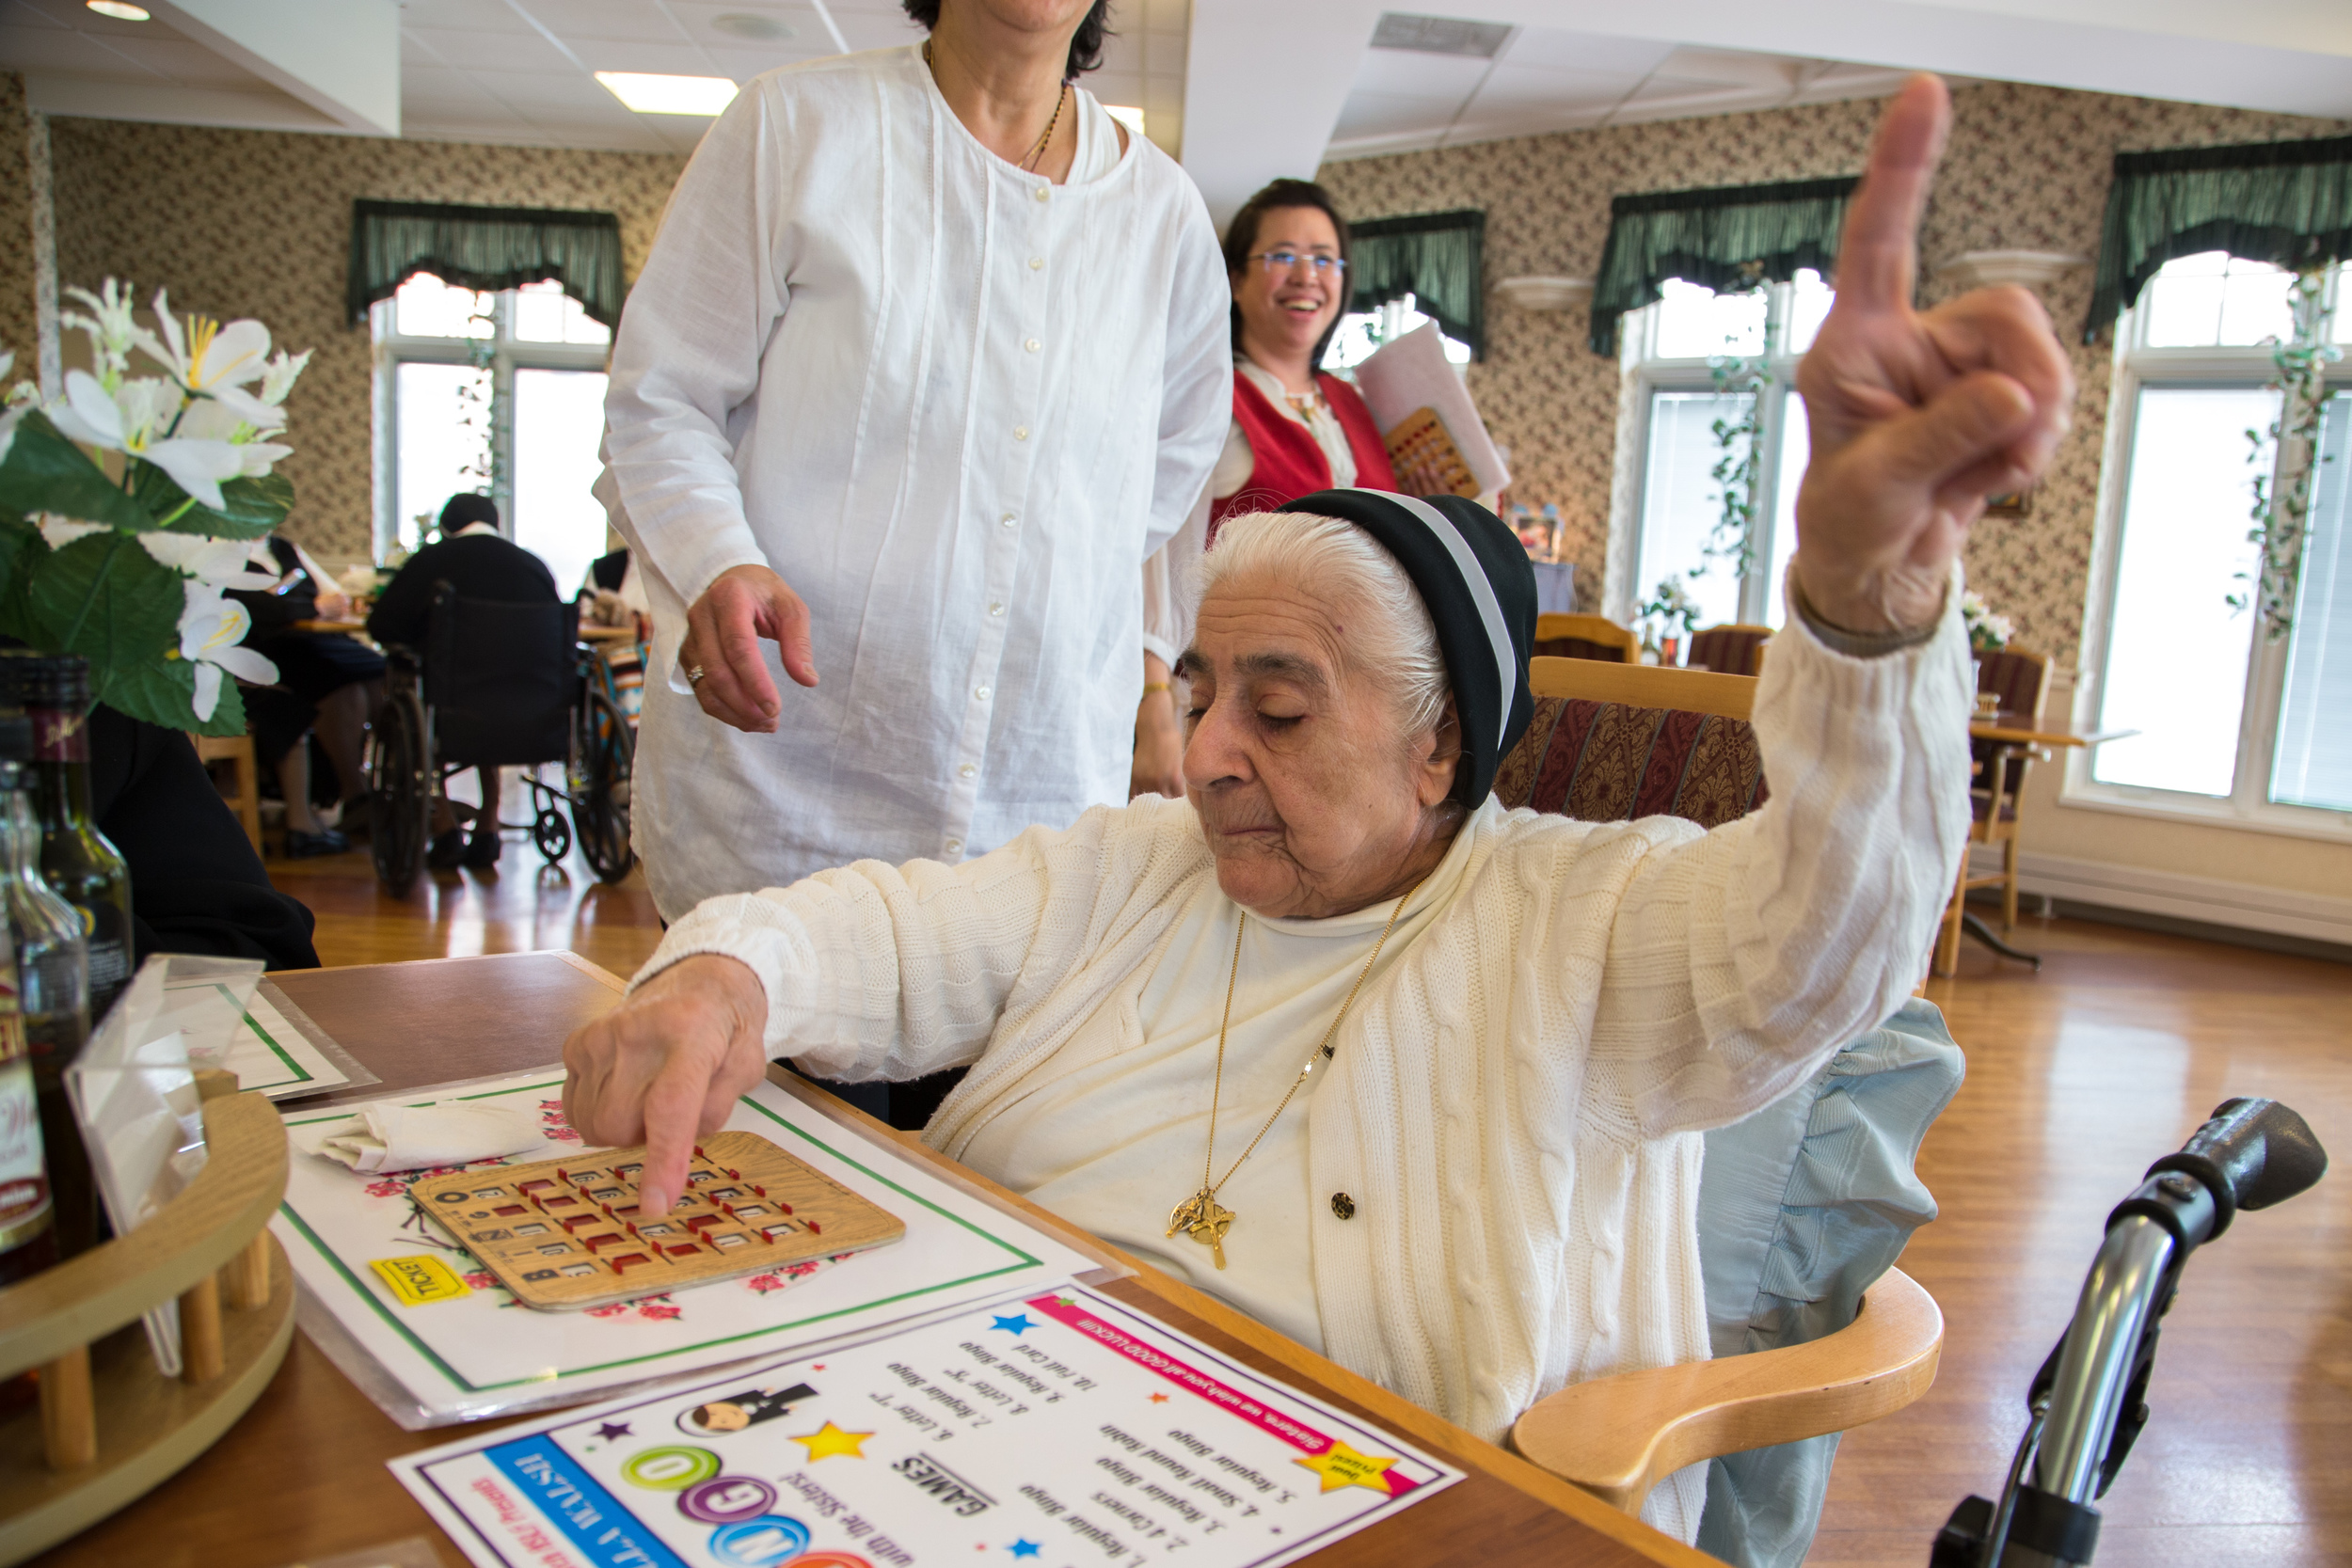   What is your biggest guilty pleasure?   Sr. Mary: “Guilty pleasure? I would have to say, homemade Italian cookies and game shows. I love to watch game shows—especially Wheel of Fortune.  I also enjoy playing Bingo with the other Sisters." 